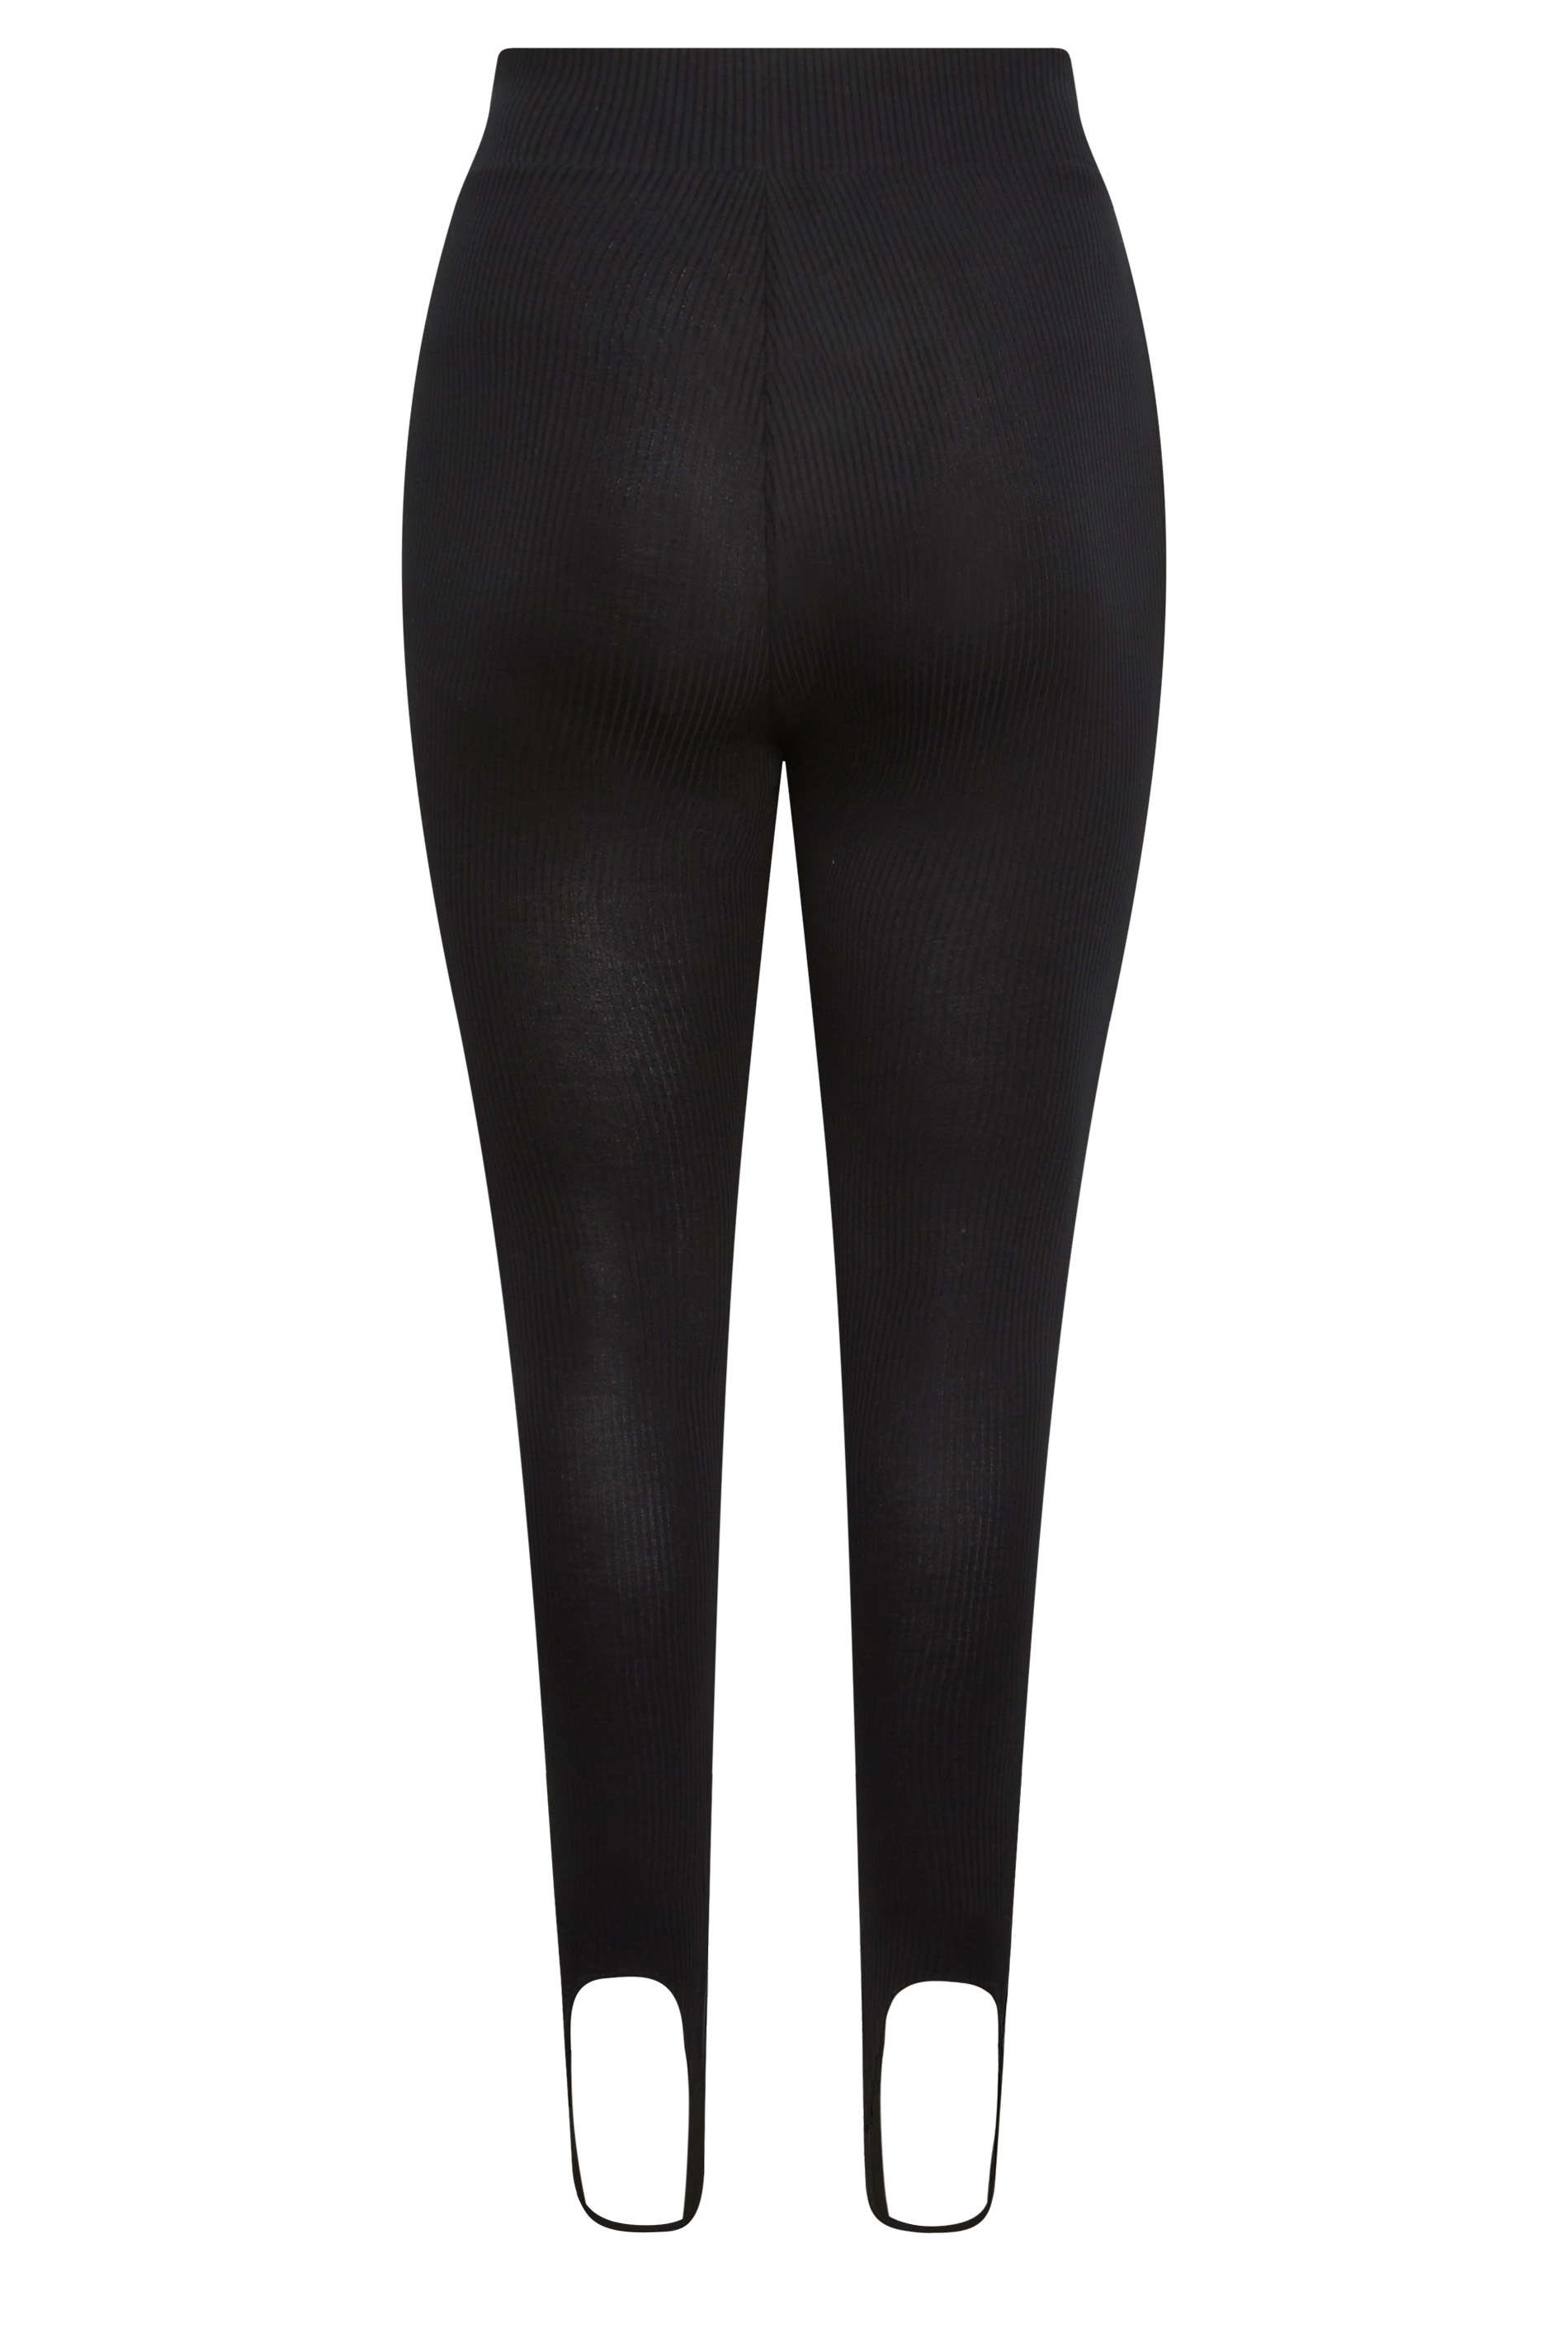 Croc Fit - Check out our Black Camo High Waisted Leggings